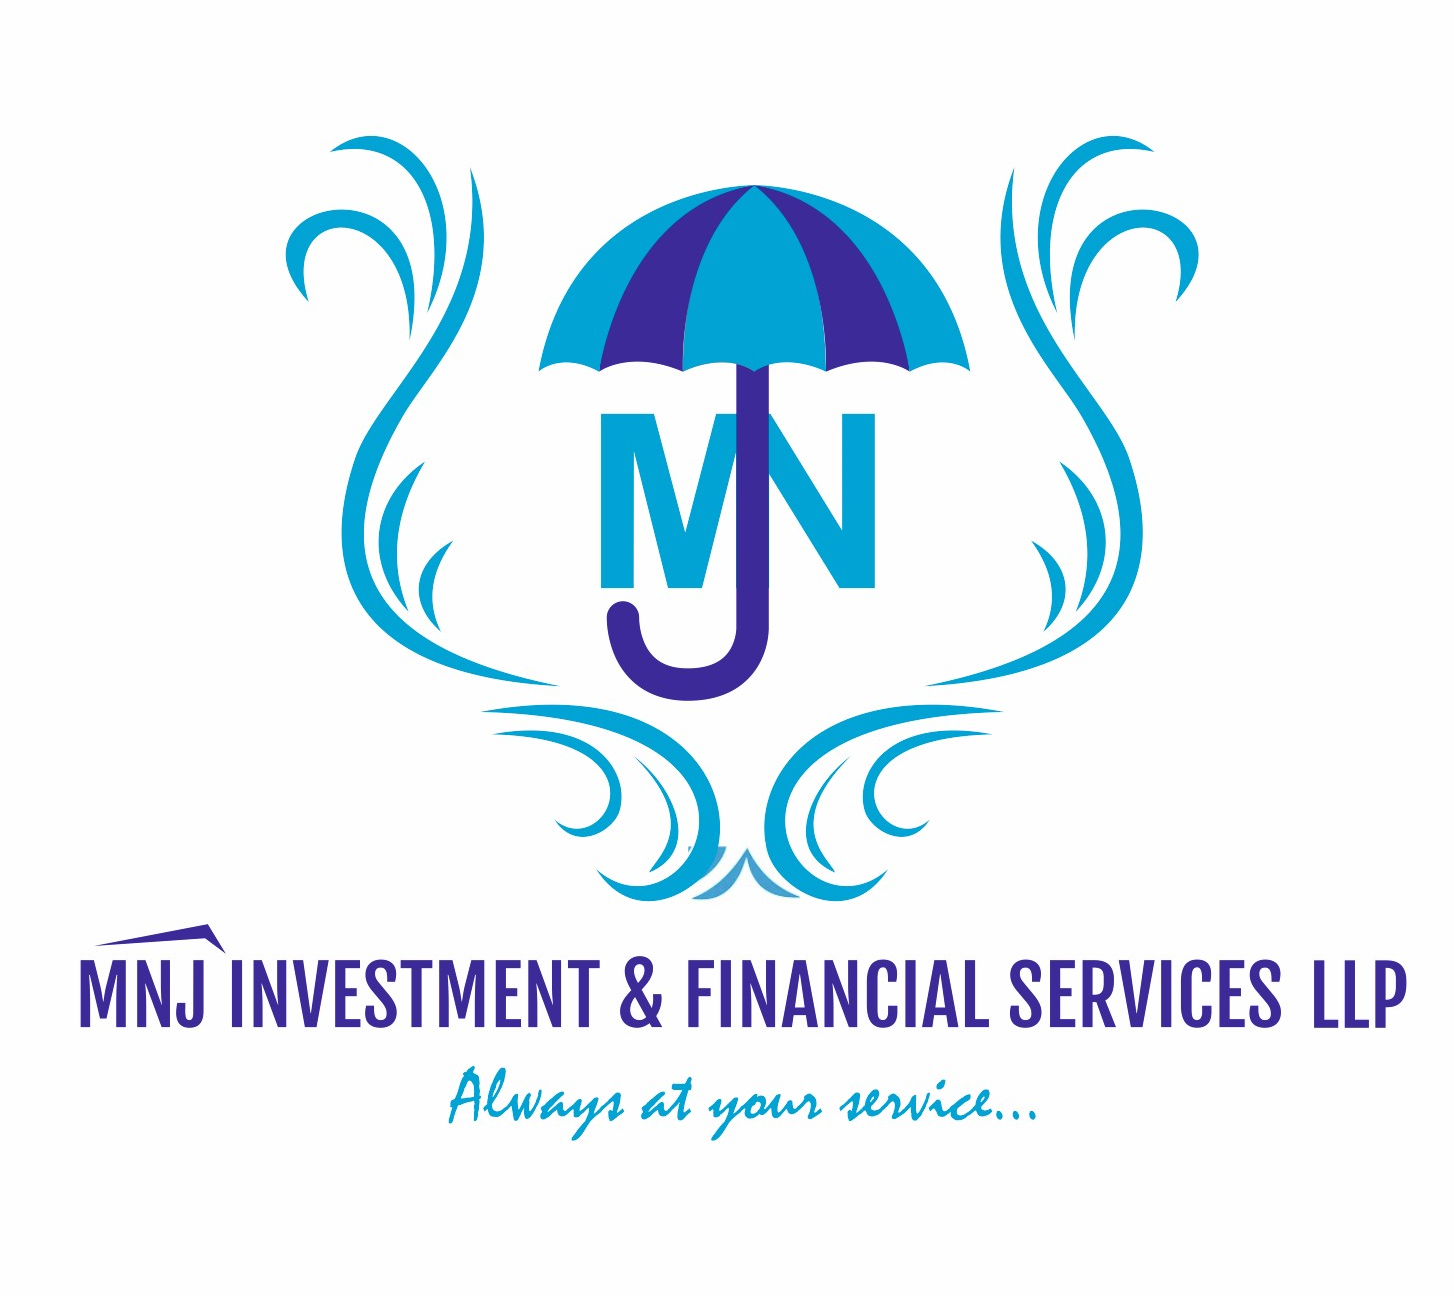 MNJ Investment & Financial Services